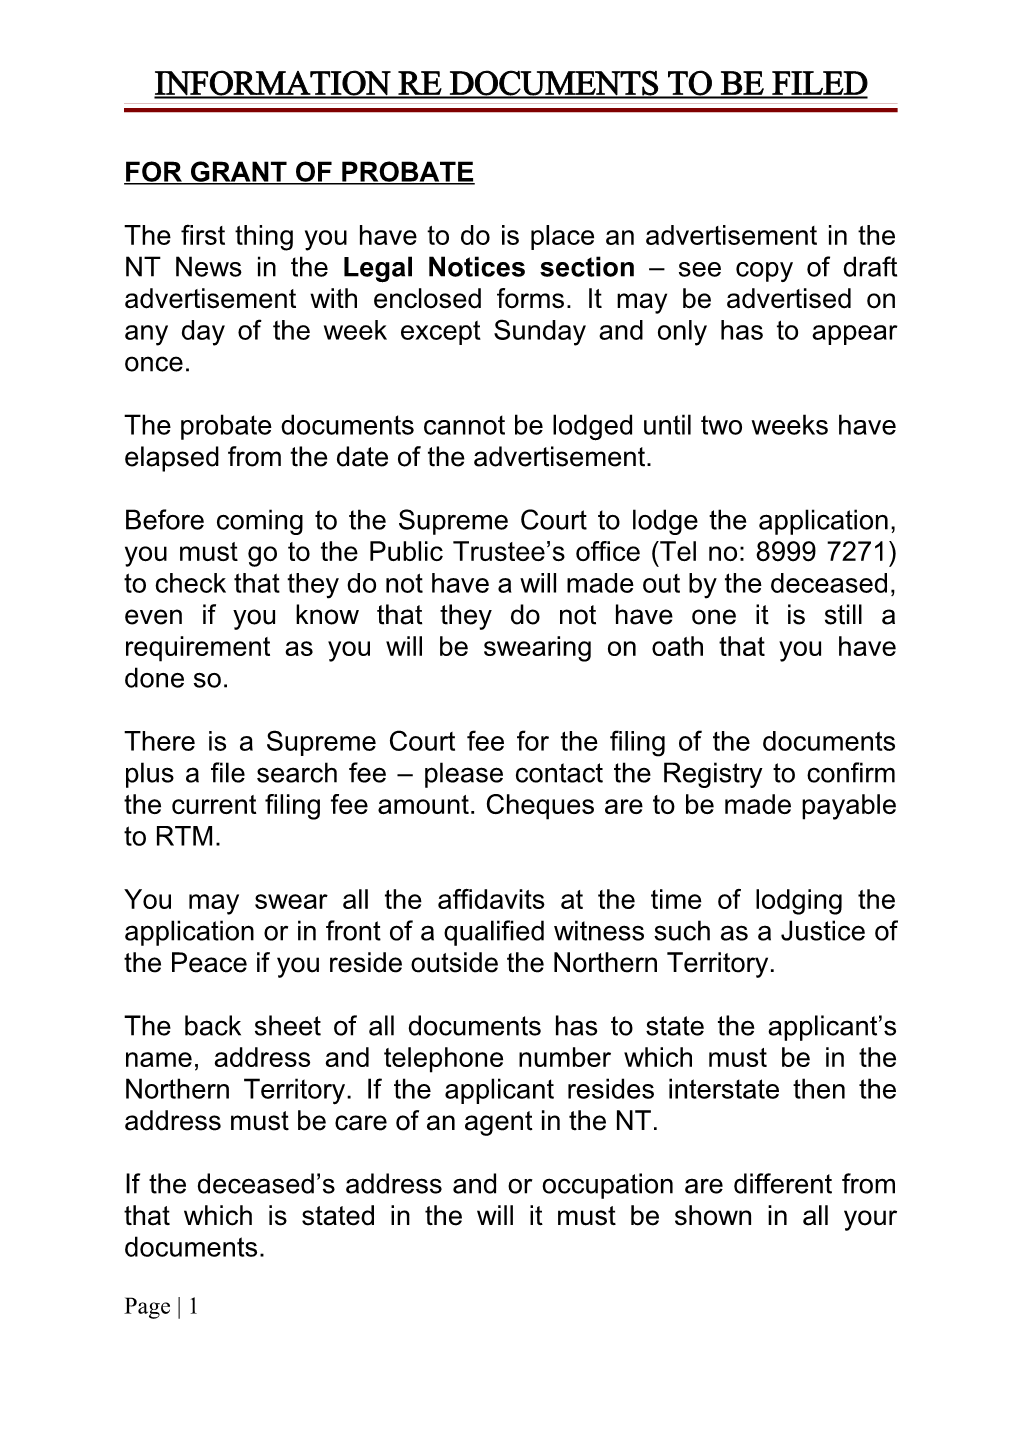 Information Re Documents to Be Filed